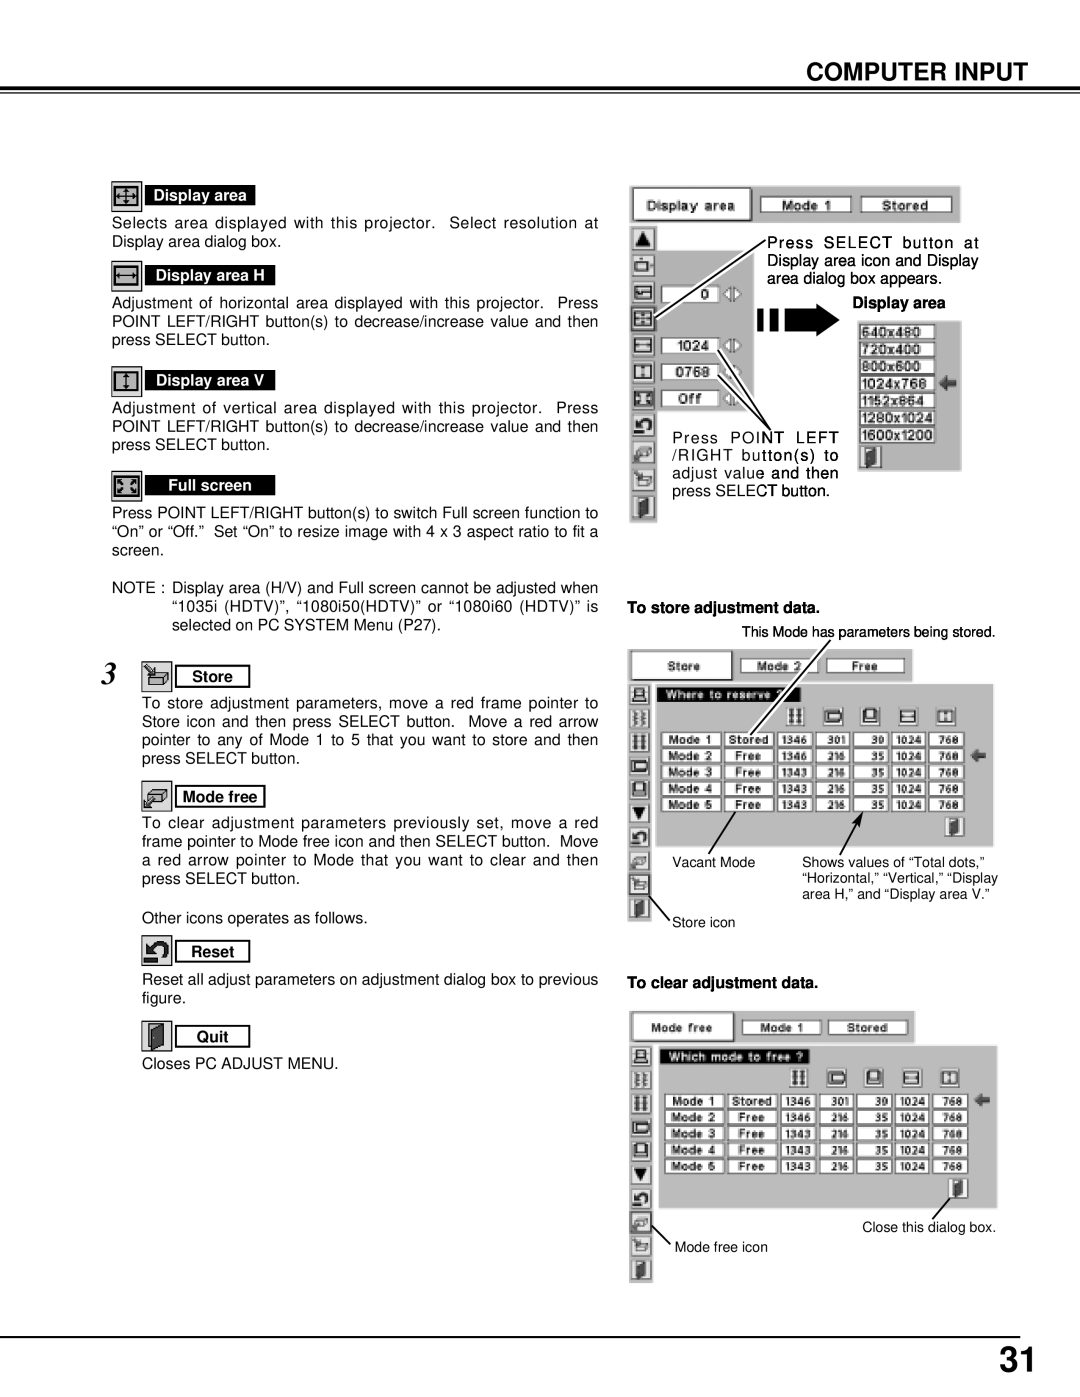 Eiki LC-UXT1 instruction manual Computer Input, Other icons operates as follows 